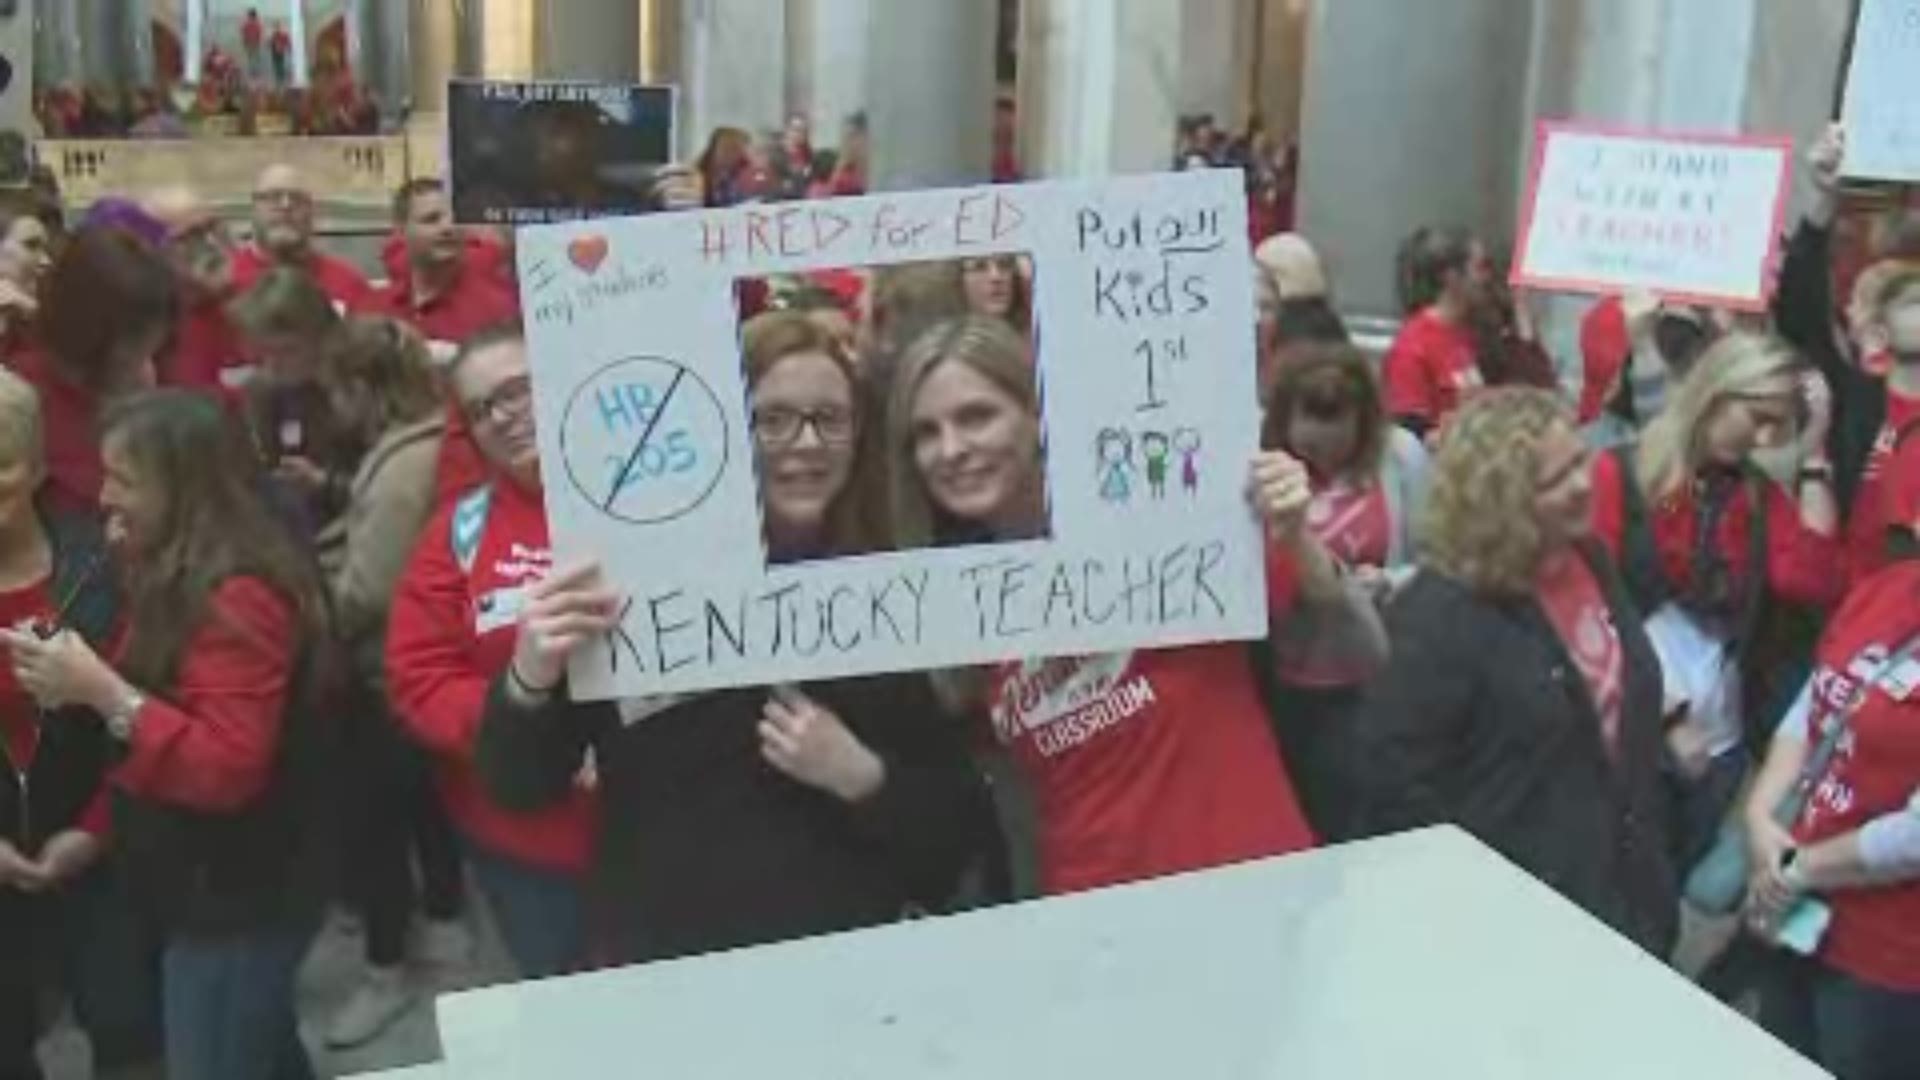 Lawmakers were set to discuss legislation at 2 p.m. on March 12 and teachers headed to Frankfort.